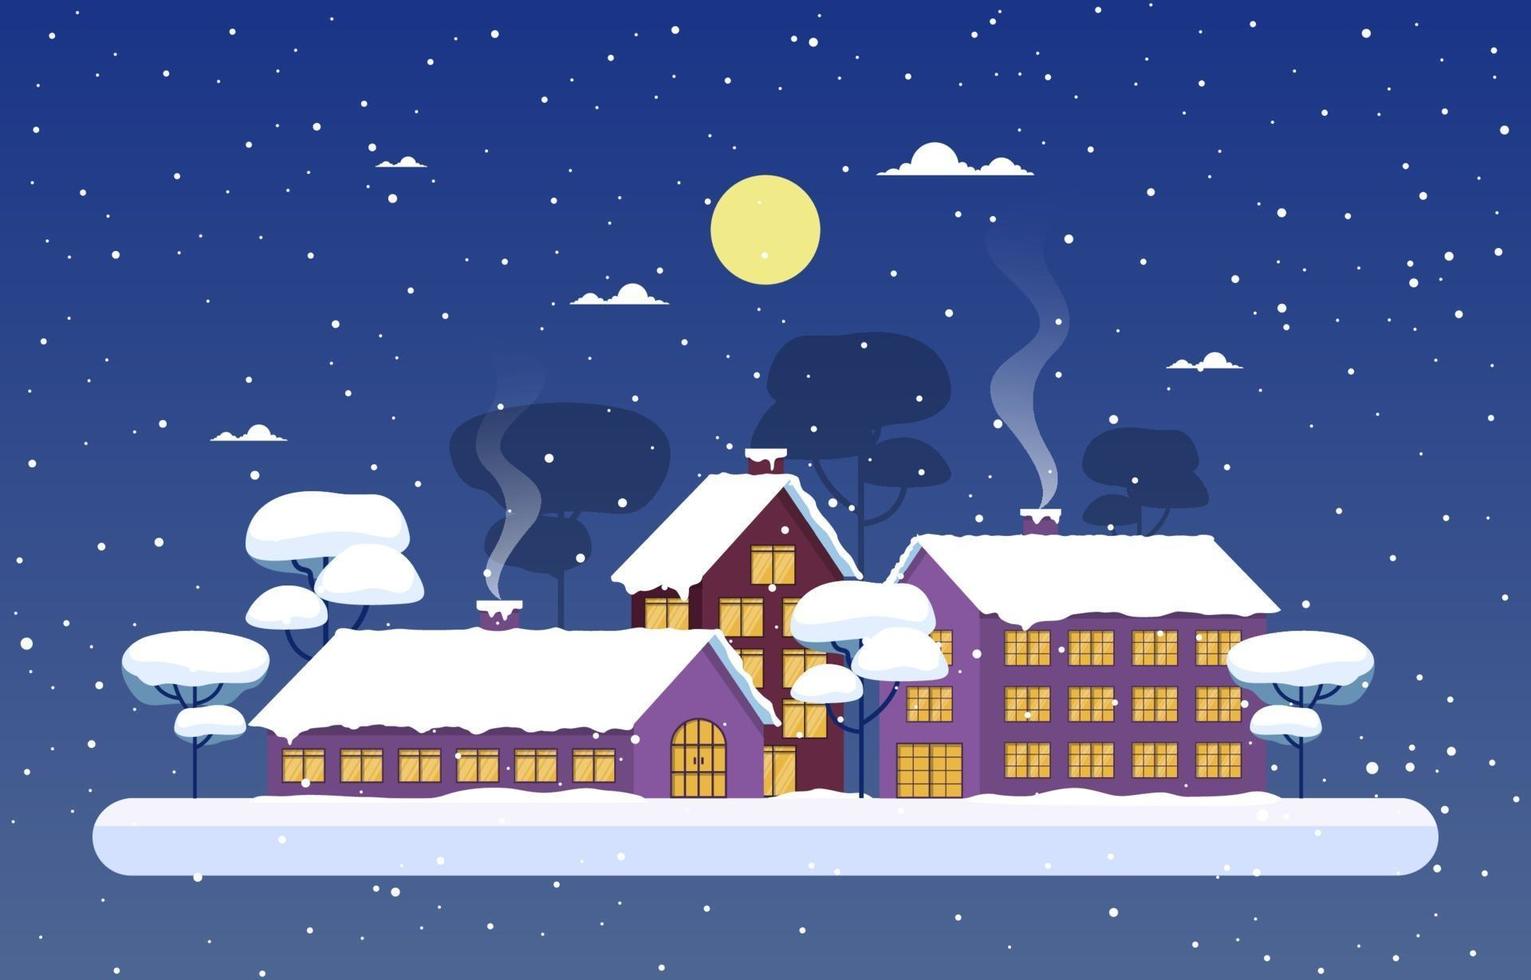 Cozy Snowy Winter City Scene with Trees, Homes, and Moon vector